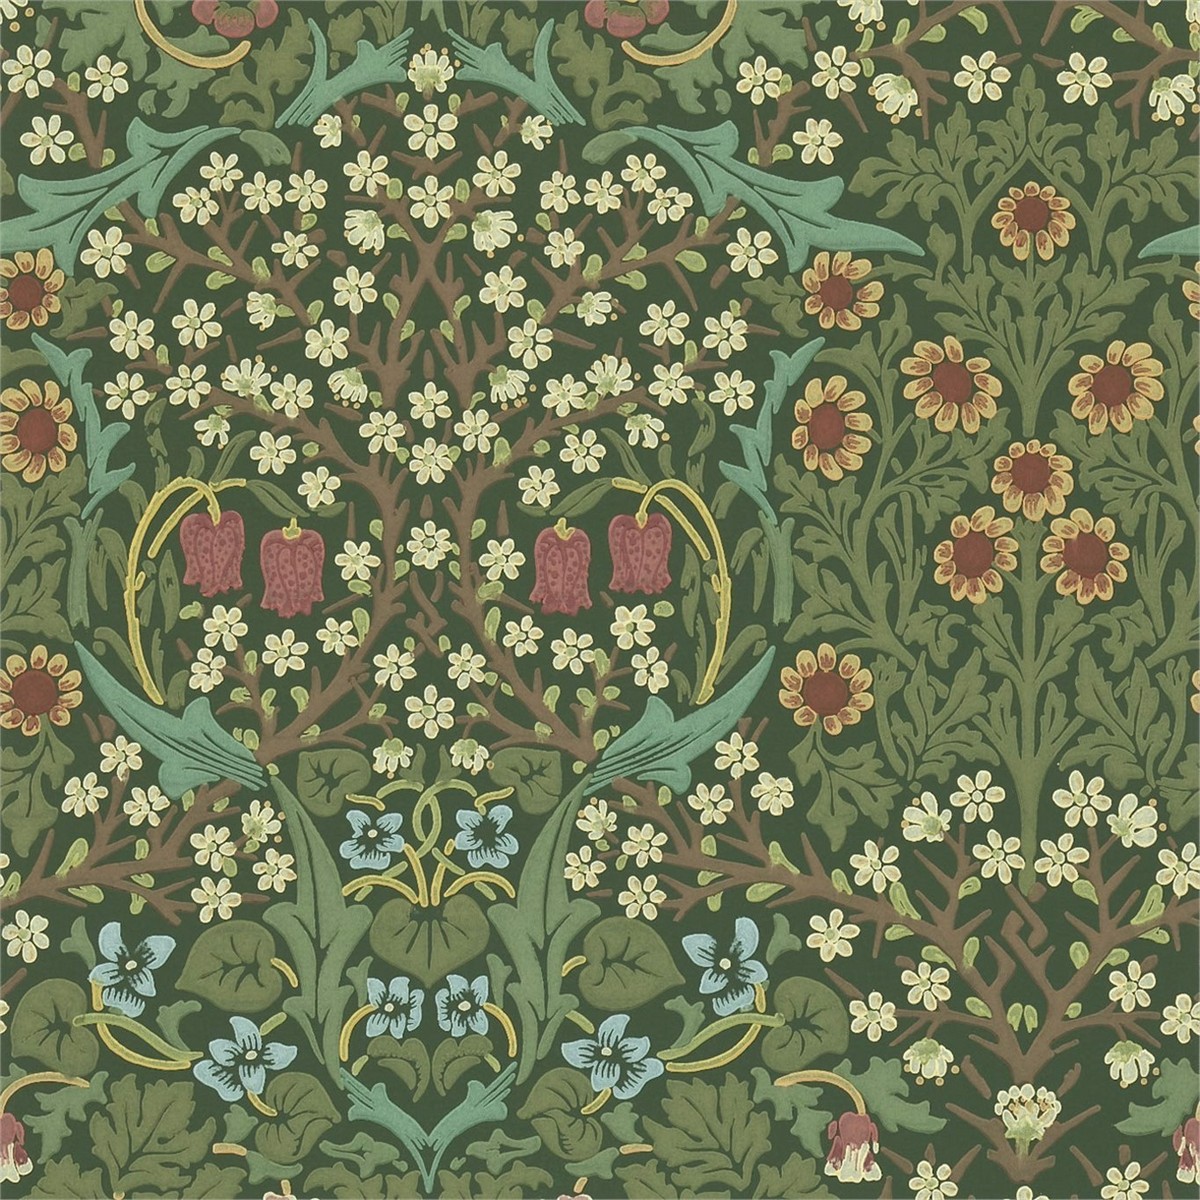 Blackthorn Green Fabric by William Morris & Co.